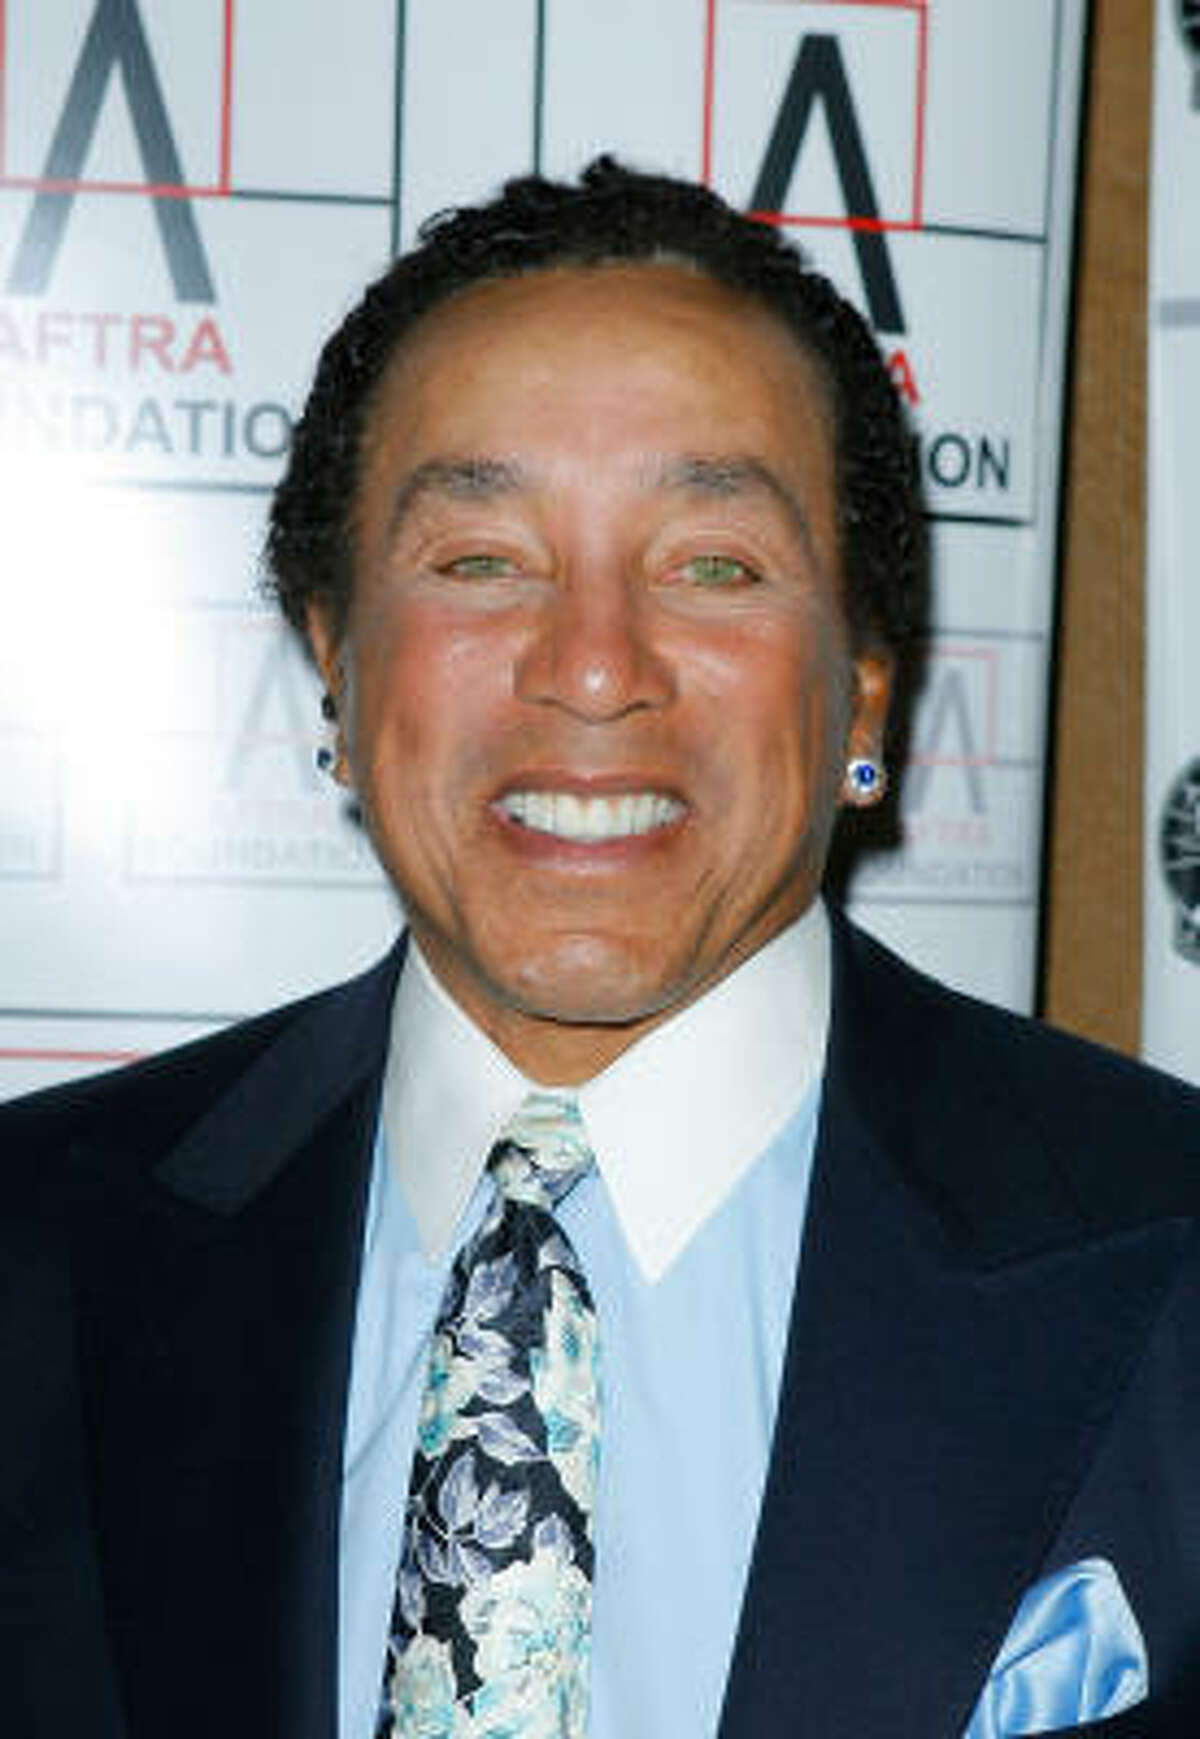 Singer Smokey Robinson was one of the earliest African-American sex symbols when his Motown-sound band, The Miracles, rose to stardom in the 1960s.